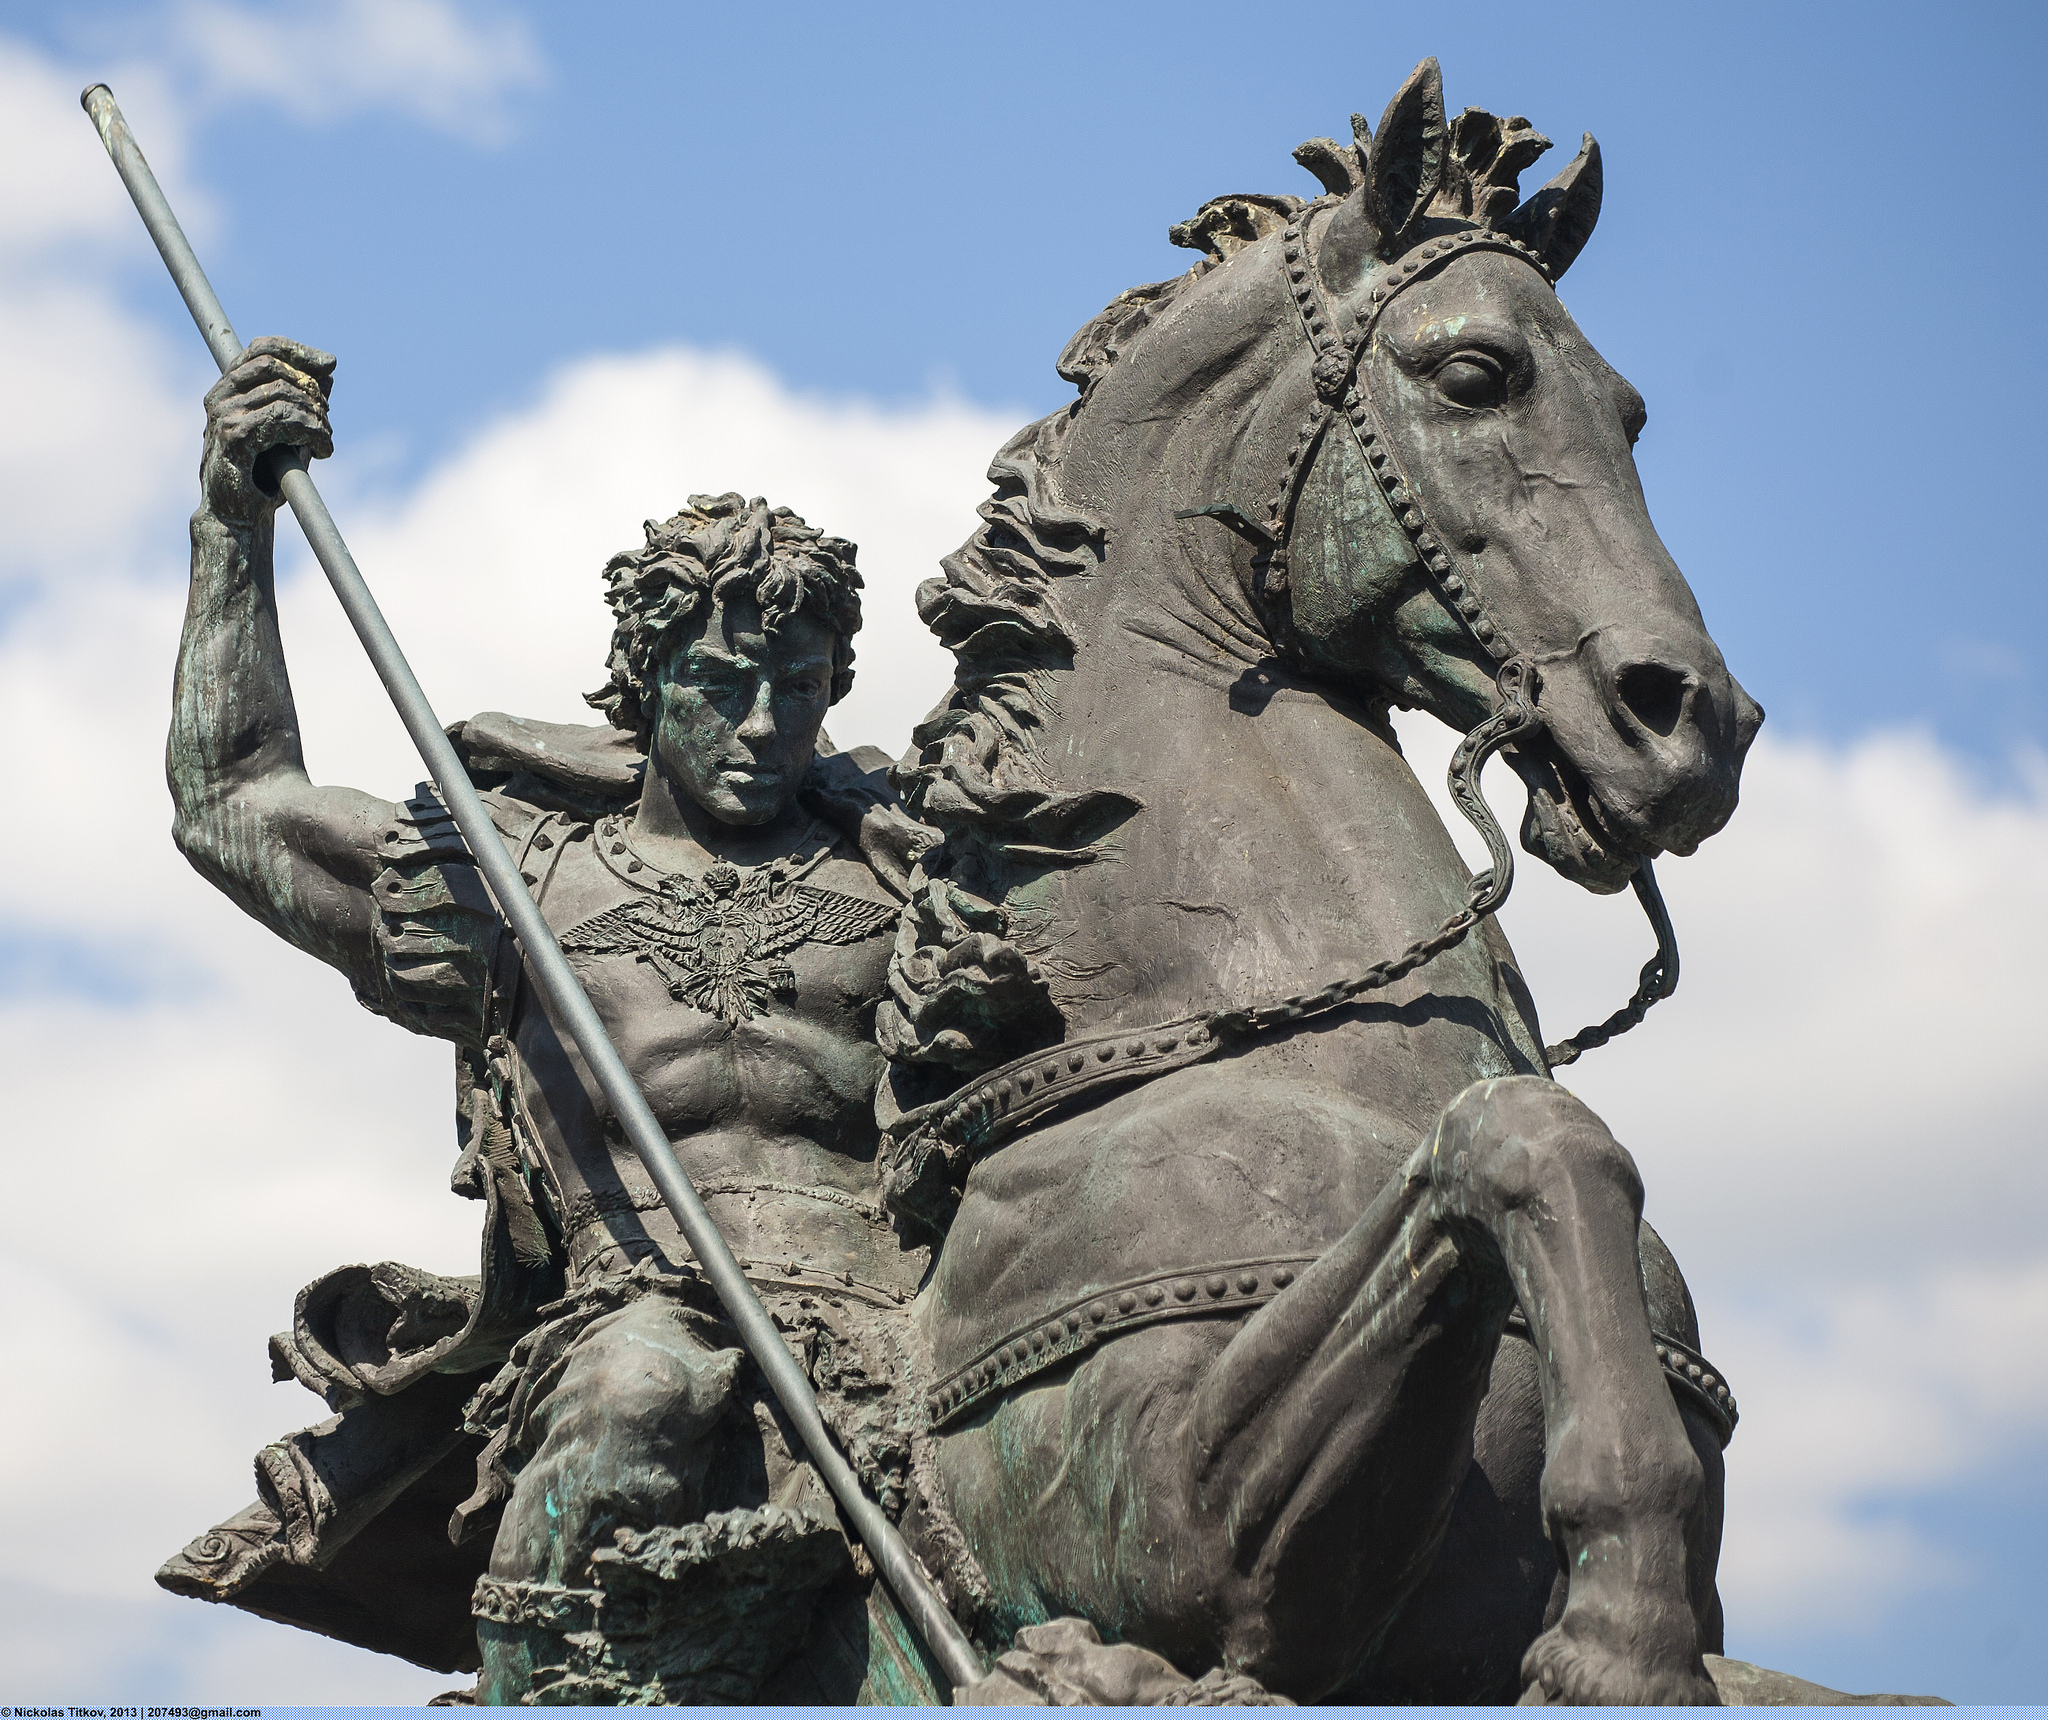 The Black Prince: England's Greatest Medieval Warrior